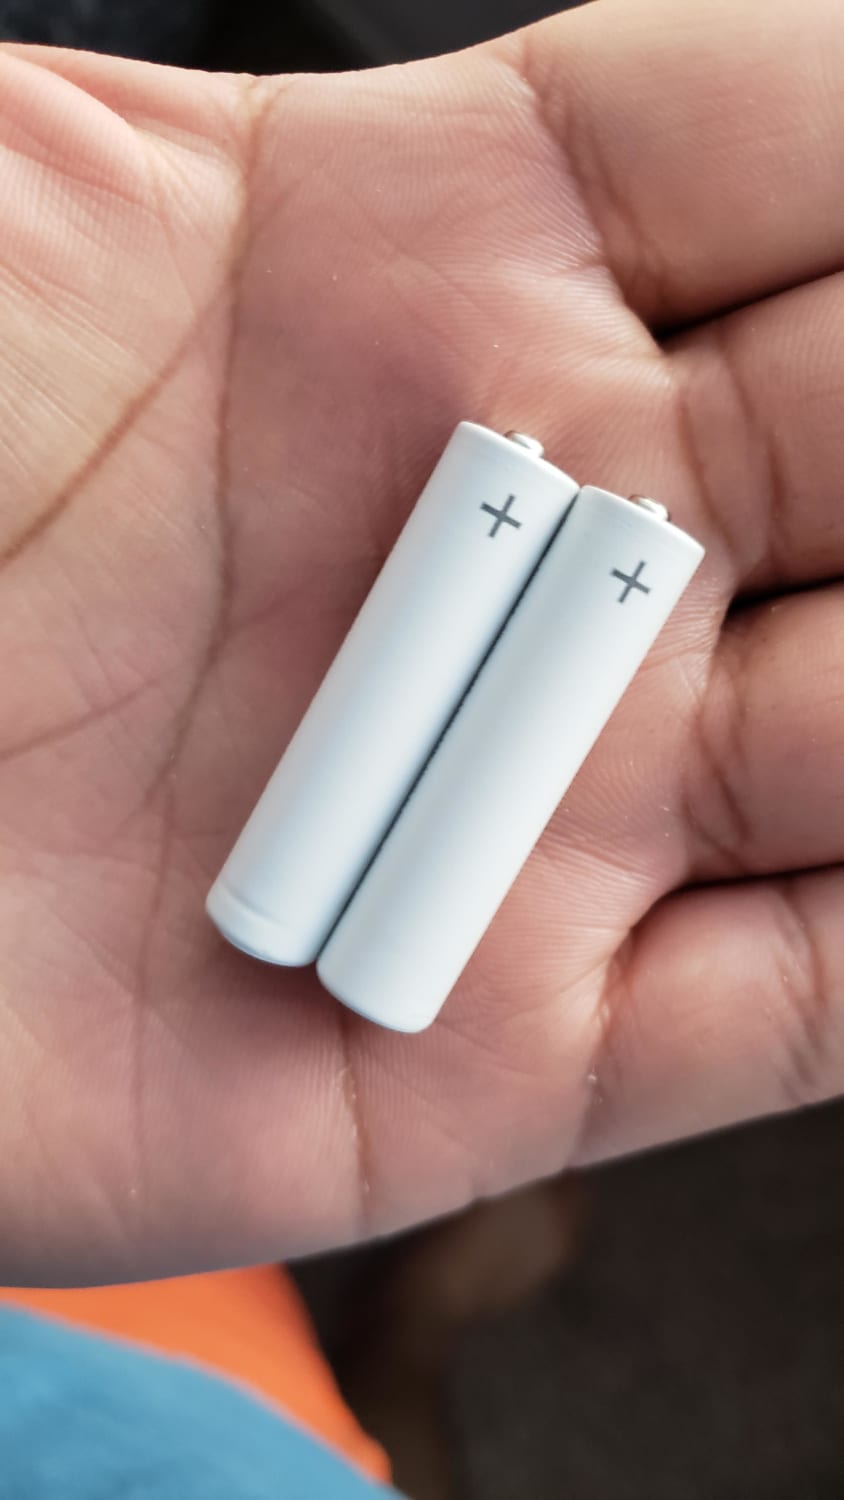 These batteries for the new Chromecast remote.